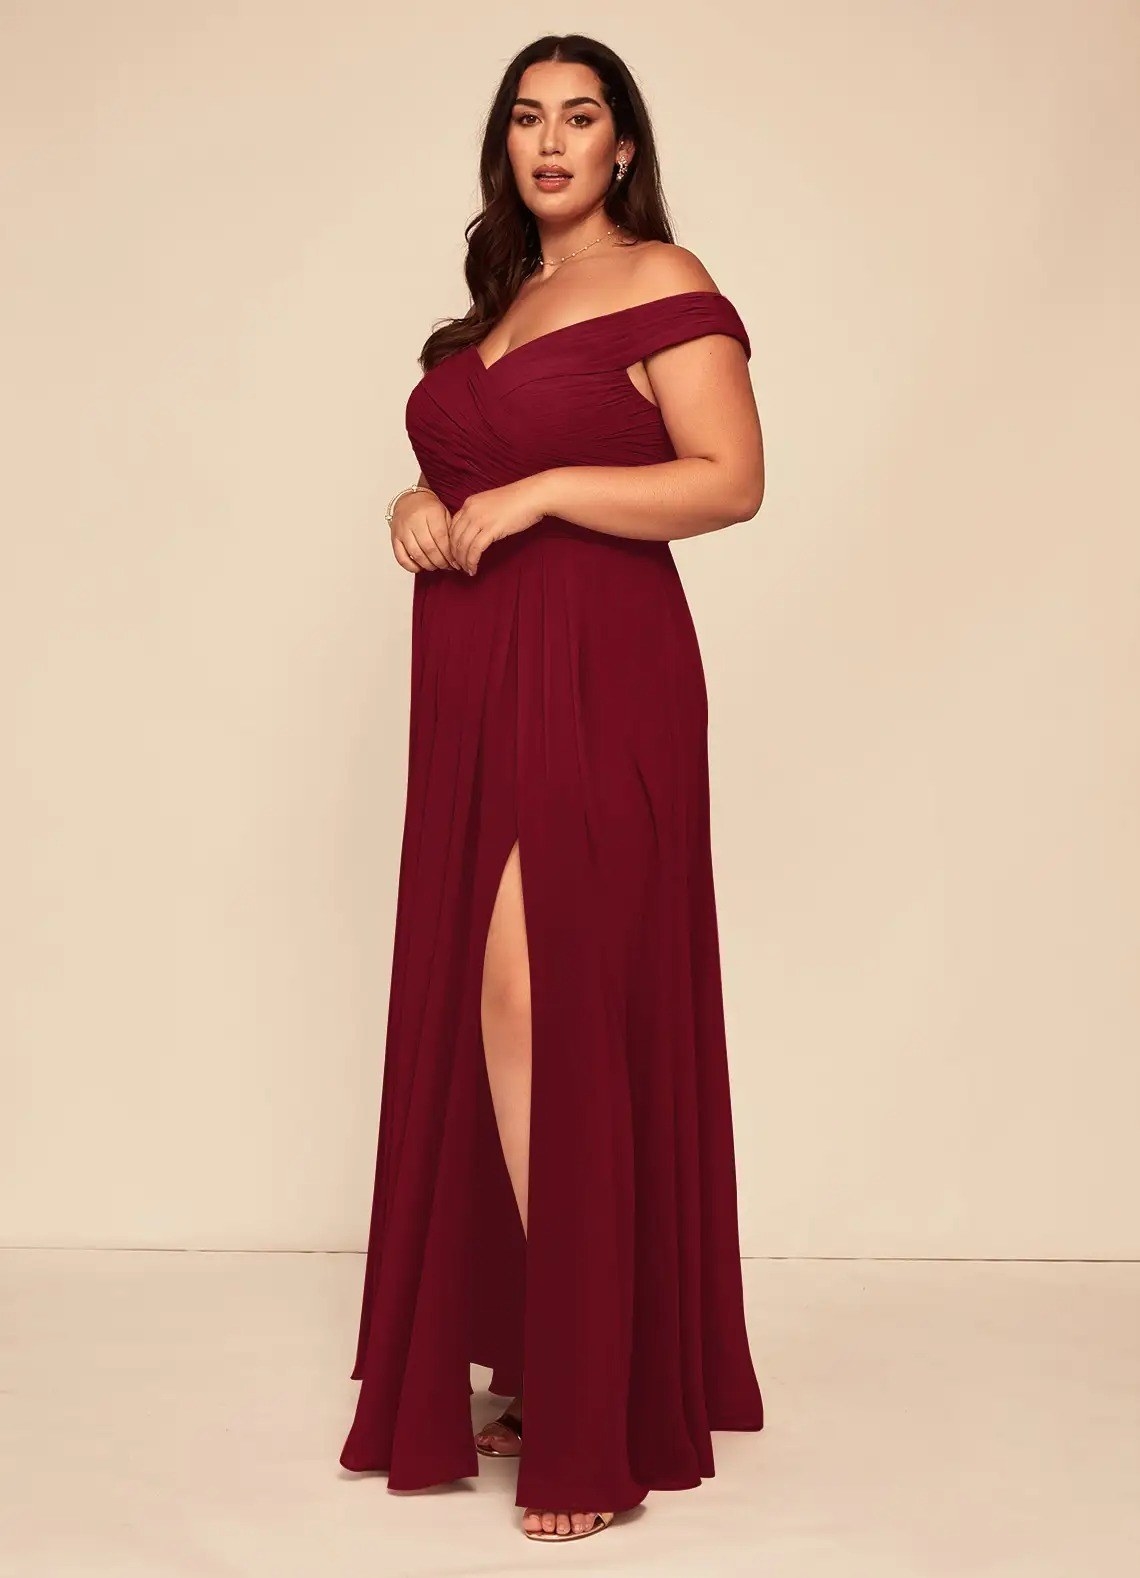 a model in an off the shoulder burgundy dress with a slit up the middle